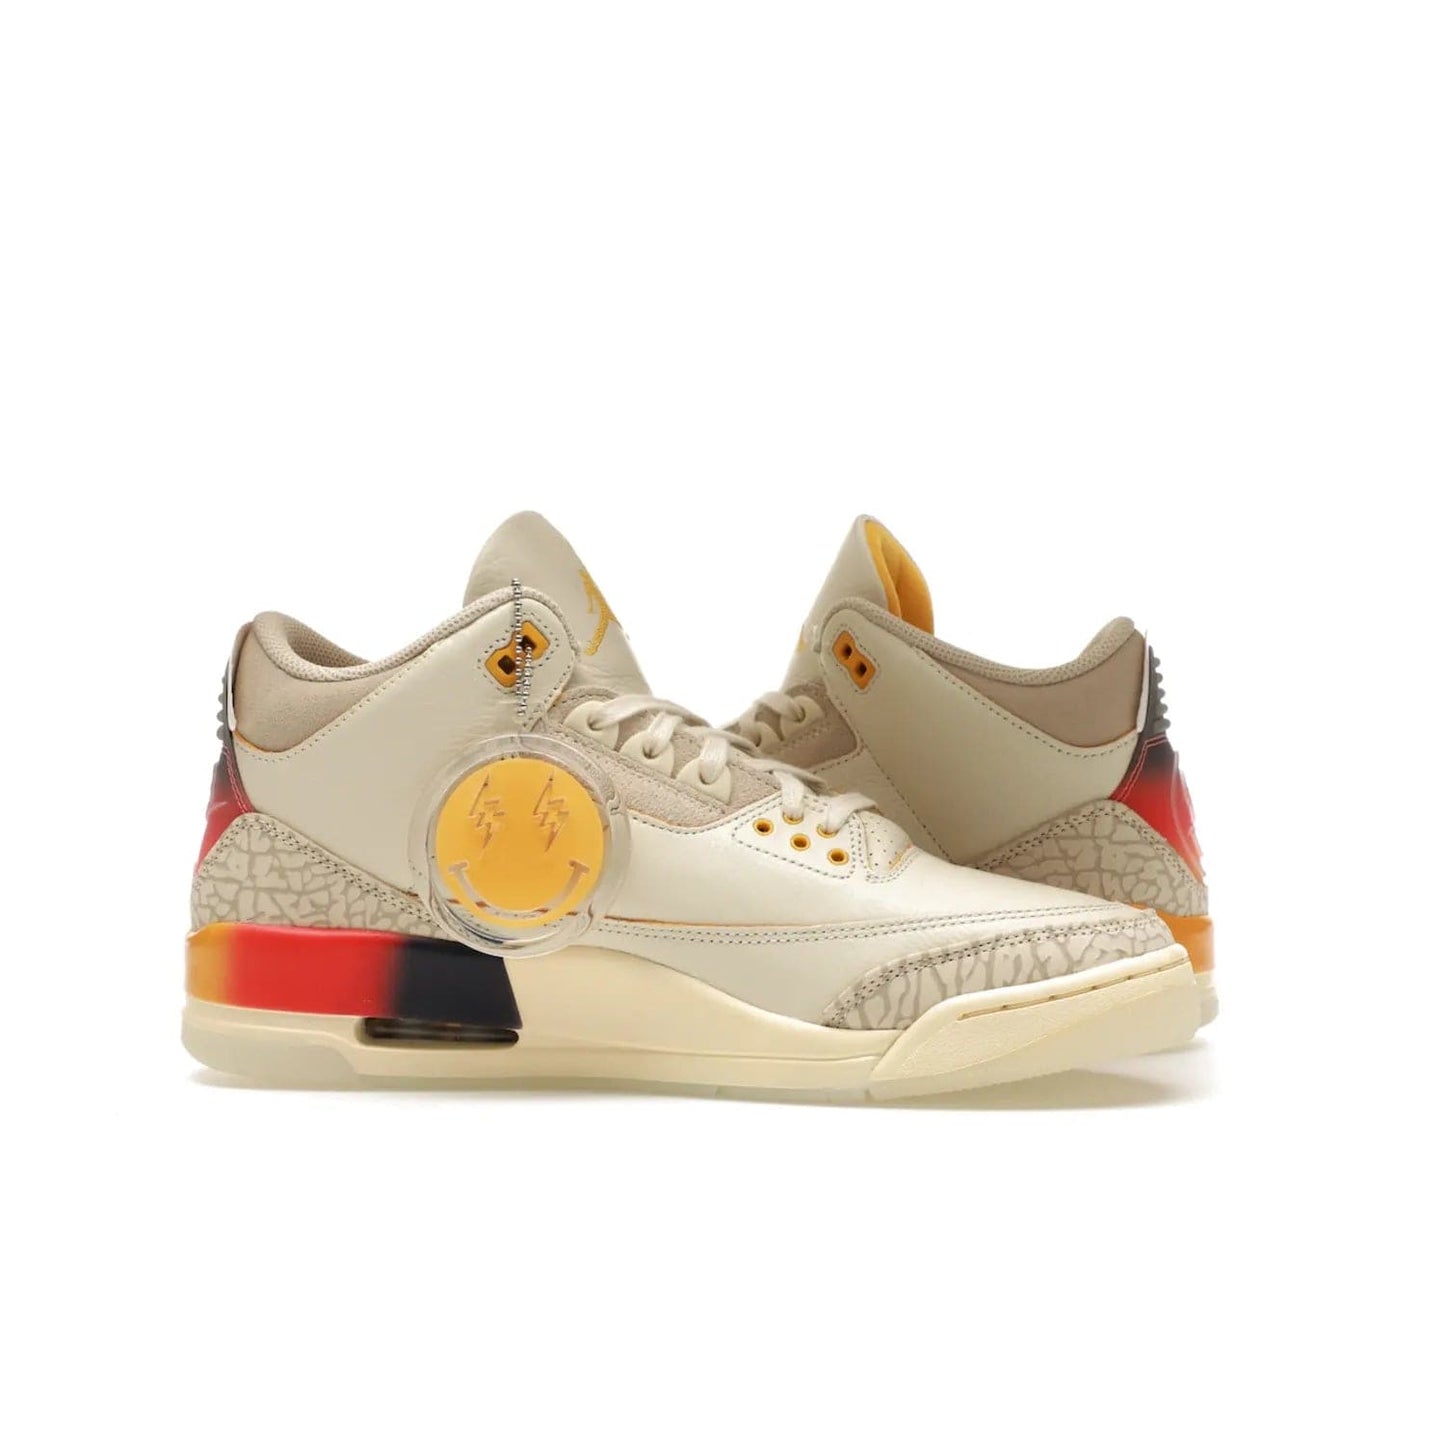 Jordan 3 Retro SP J Balvin Medellín Sunset - Image 20 - Only at www.BallersClubKickz.com - J Balvin x Jordan 3 Retro SP: Celebrate the joy of life with a colorful, homage to the electrifying reggaeton culture and iconic Jordan 3. Limited edition, Sept. 23. $250.